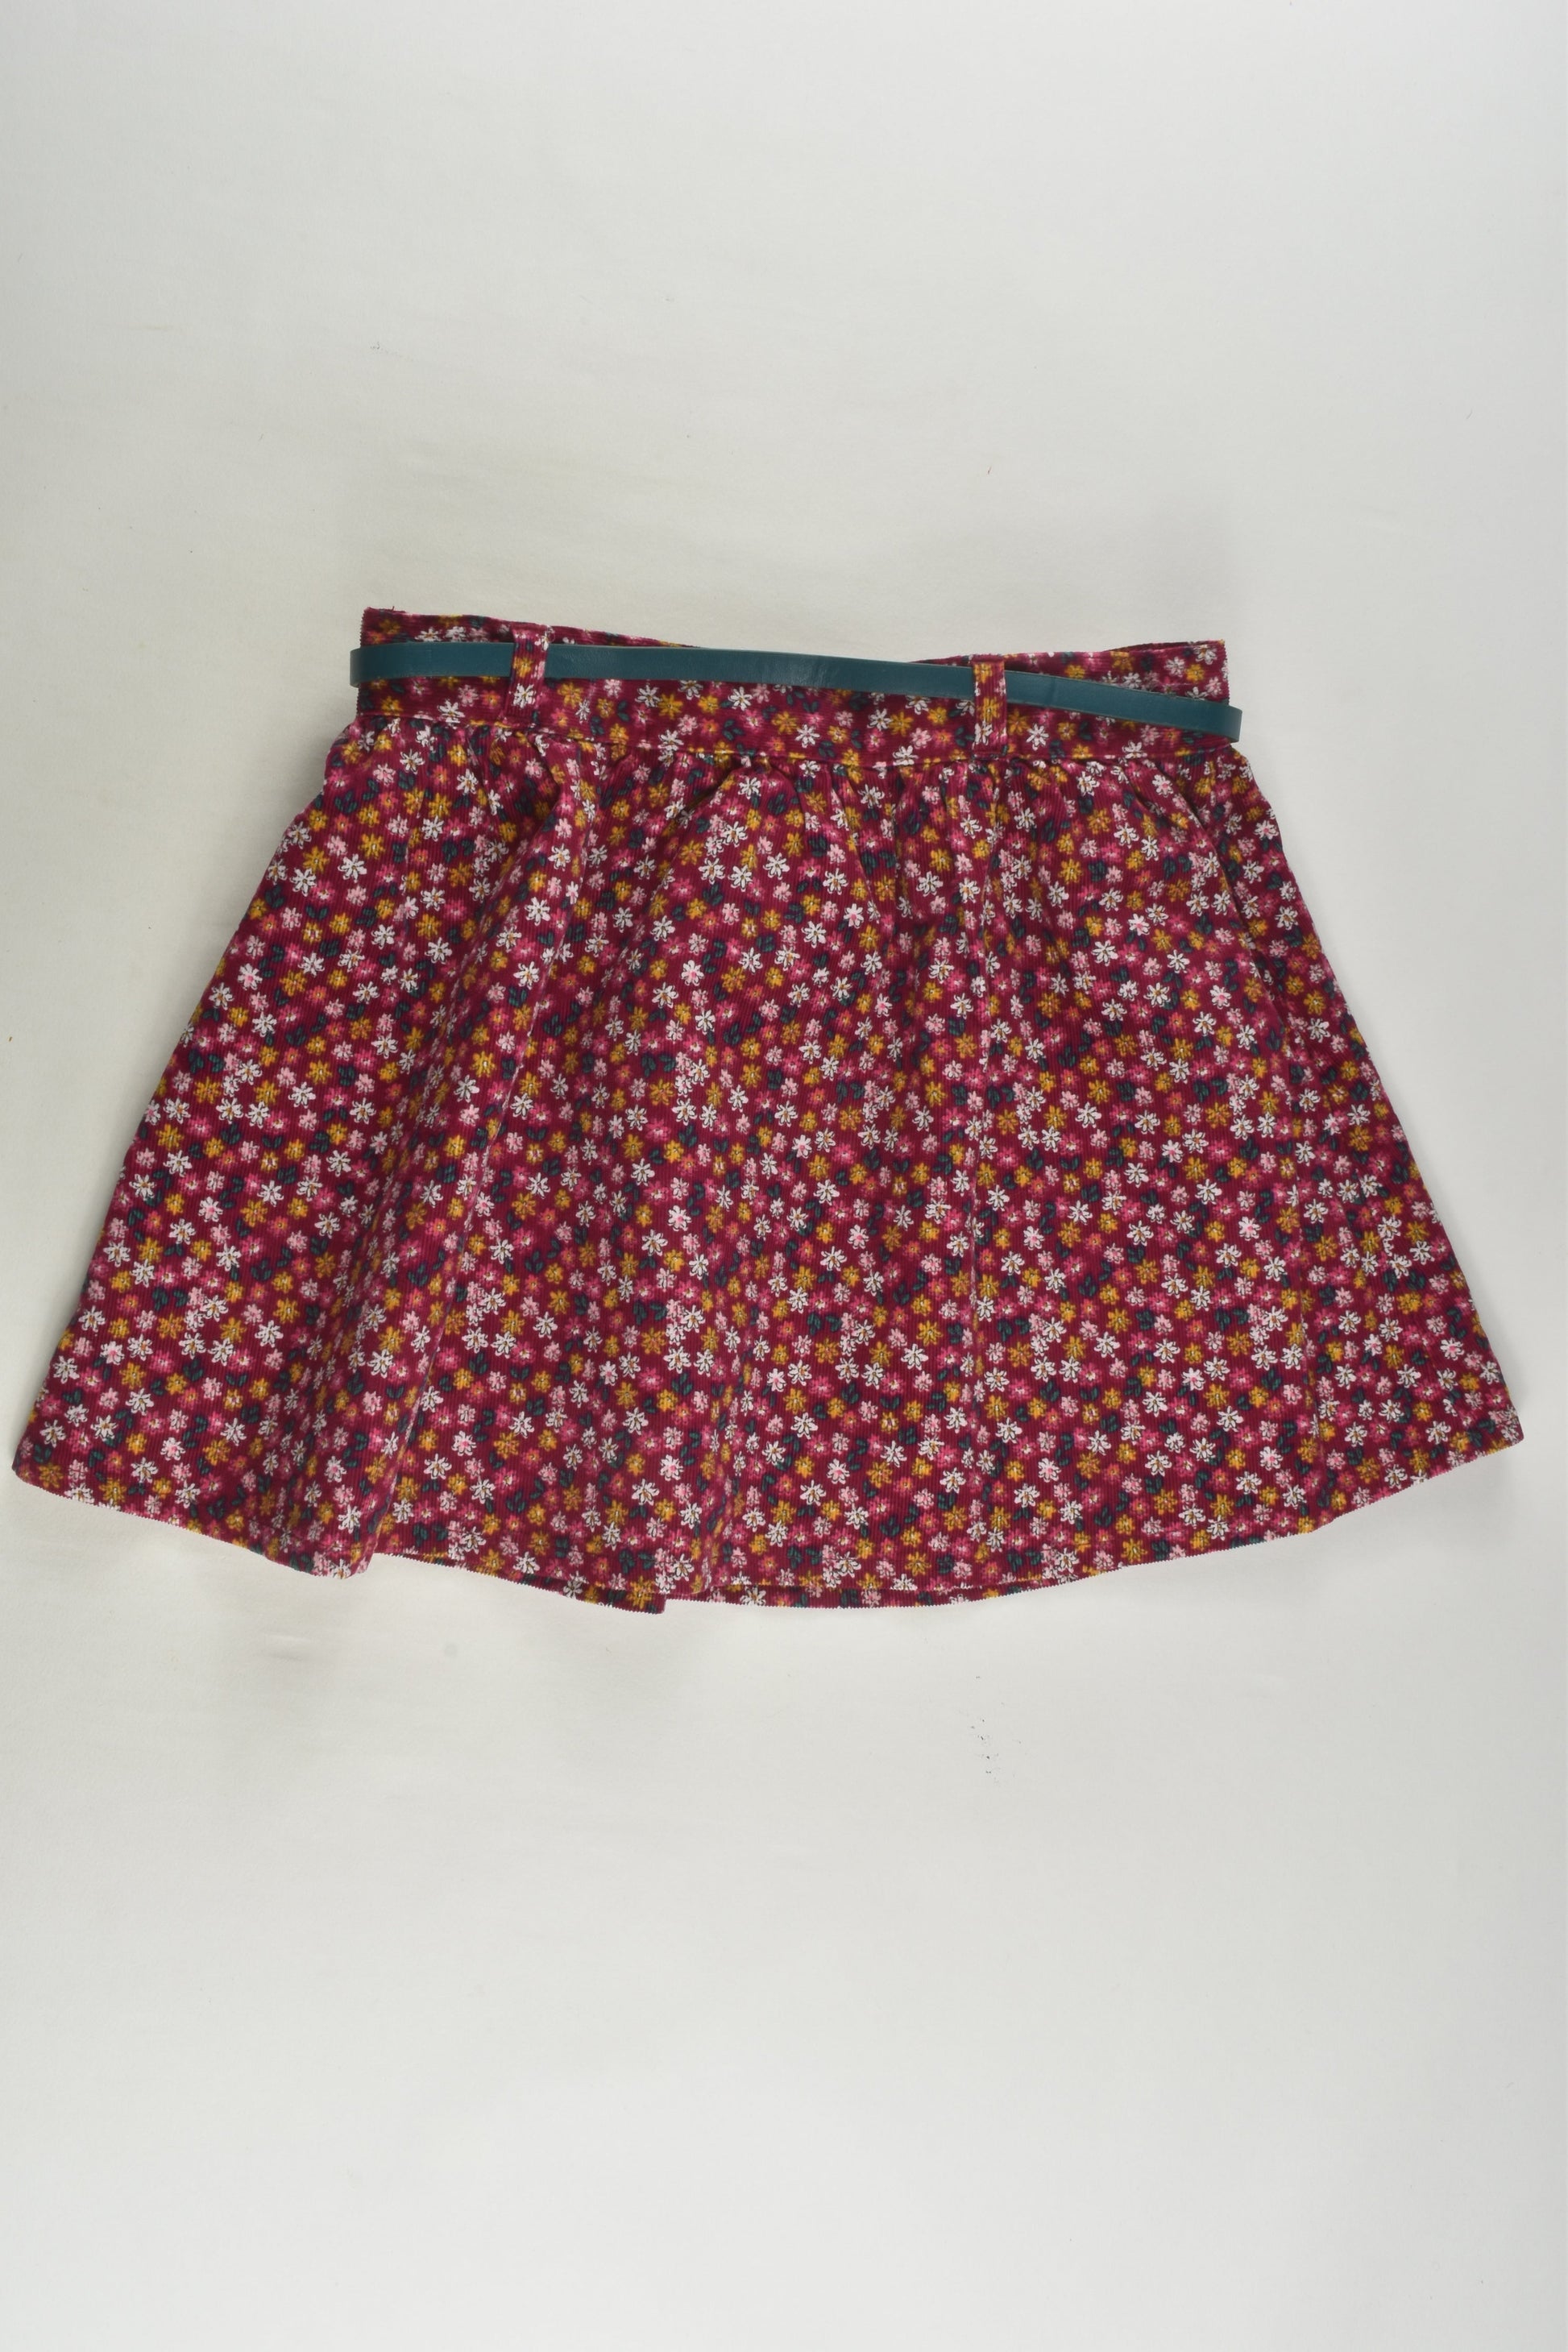 Young Dimension Size 5-6 Lined Cord Skirt with Belt